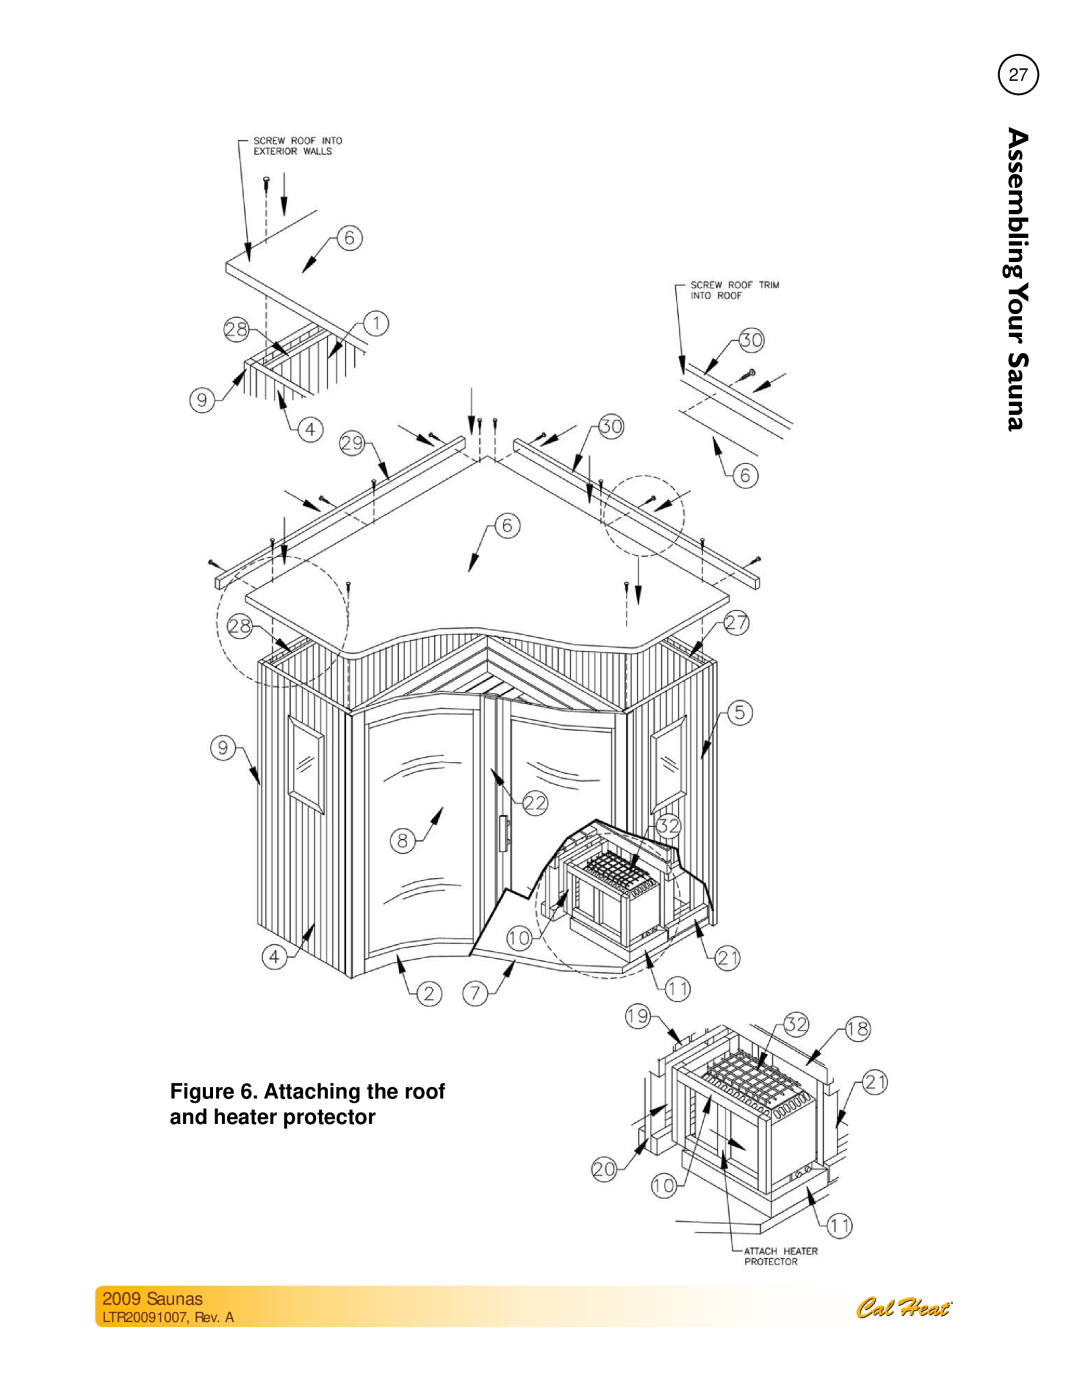 Cal Spas Saunas manual Attaching the roof and heater protector, LTR20091007, Rev. A, AssemblingYour 